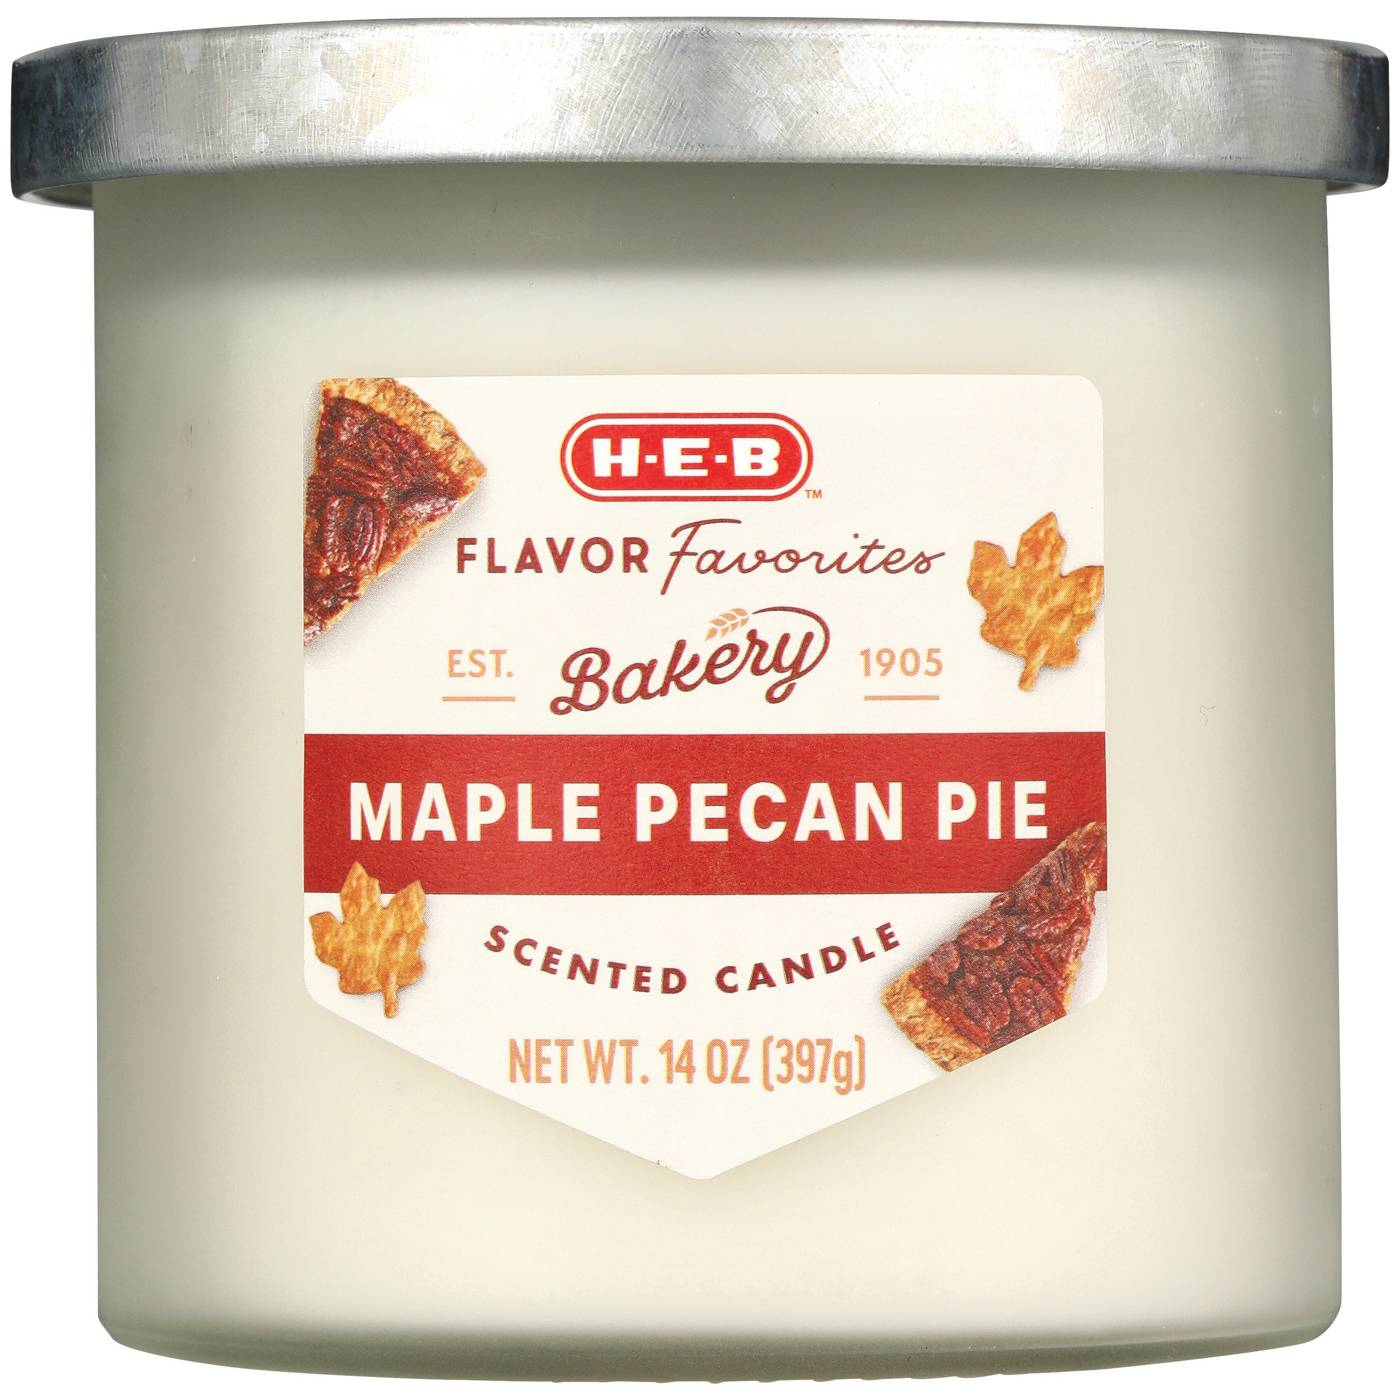 H-E-B Flavor Favorites Maple Pecan Pie Scented Candle; image 1 of 2